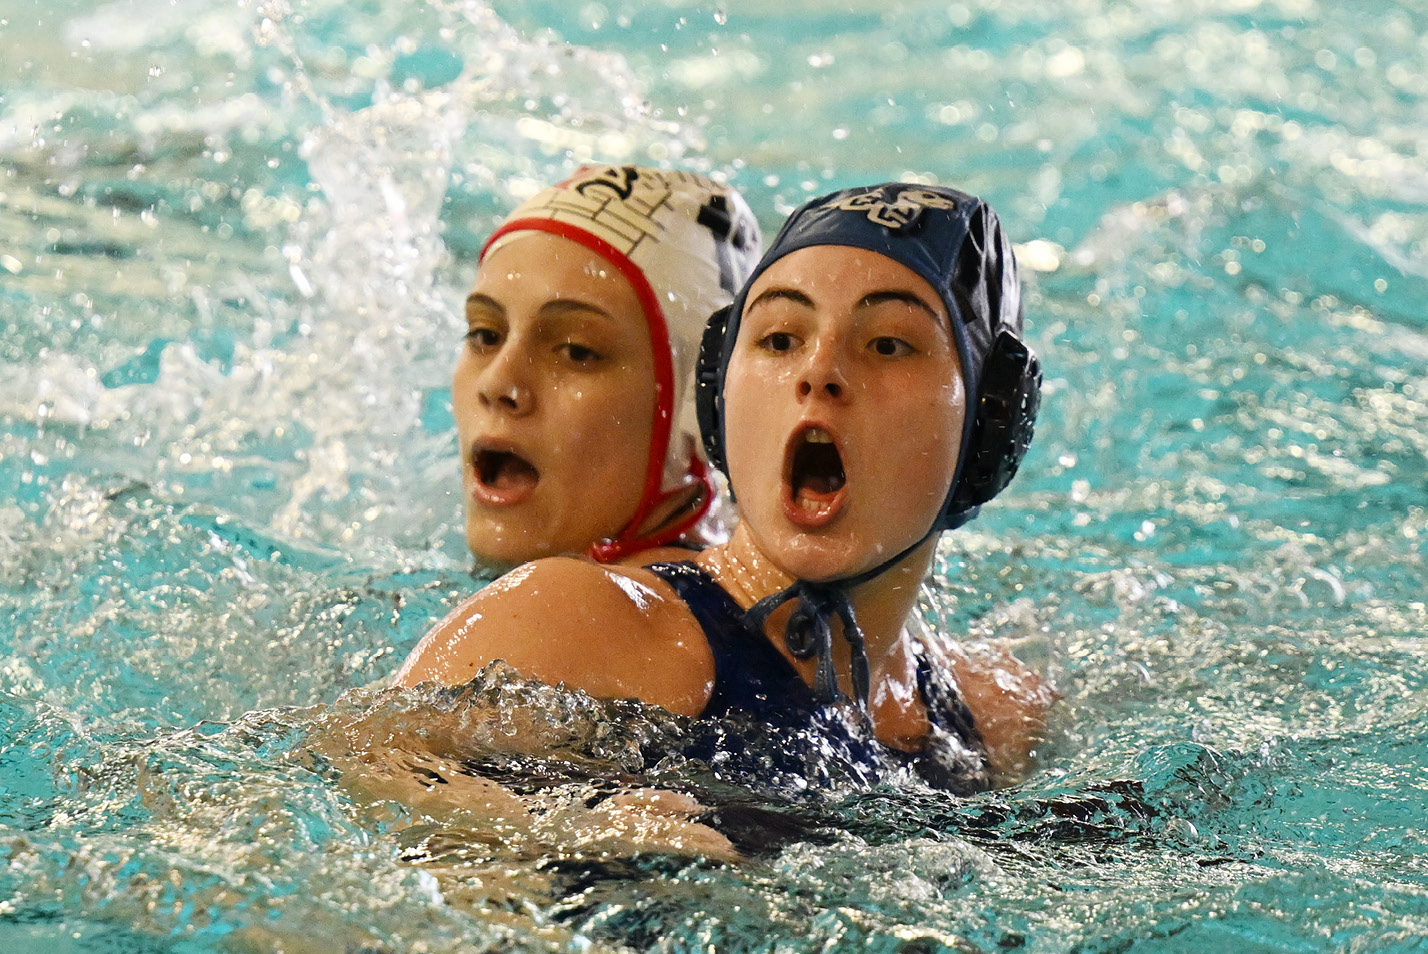 Women's water polo players anticipate the shot.